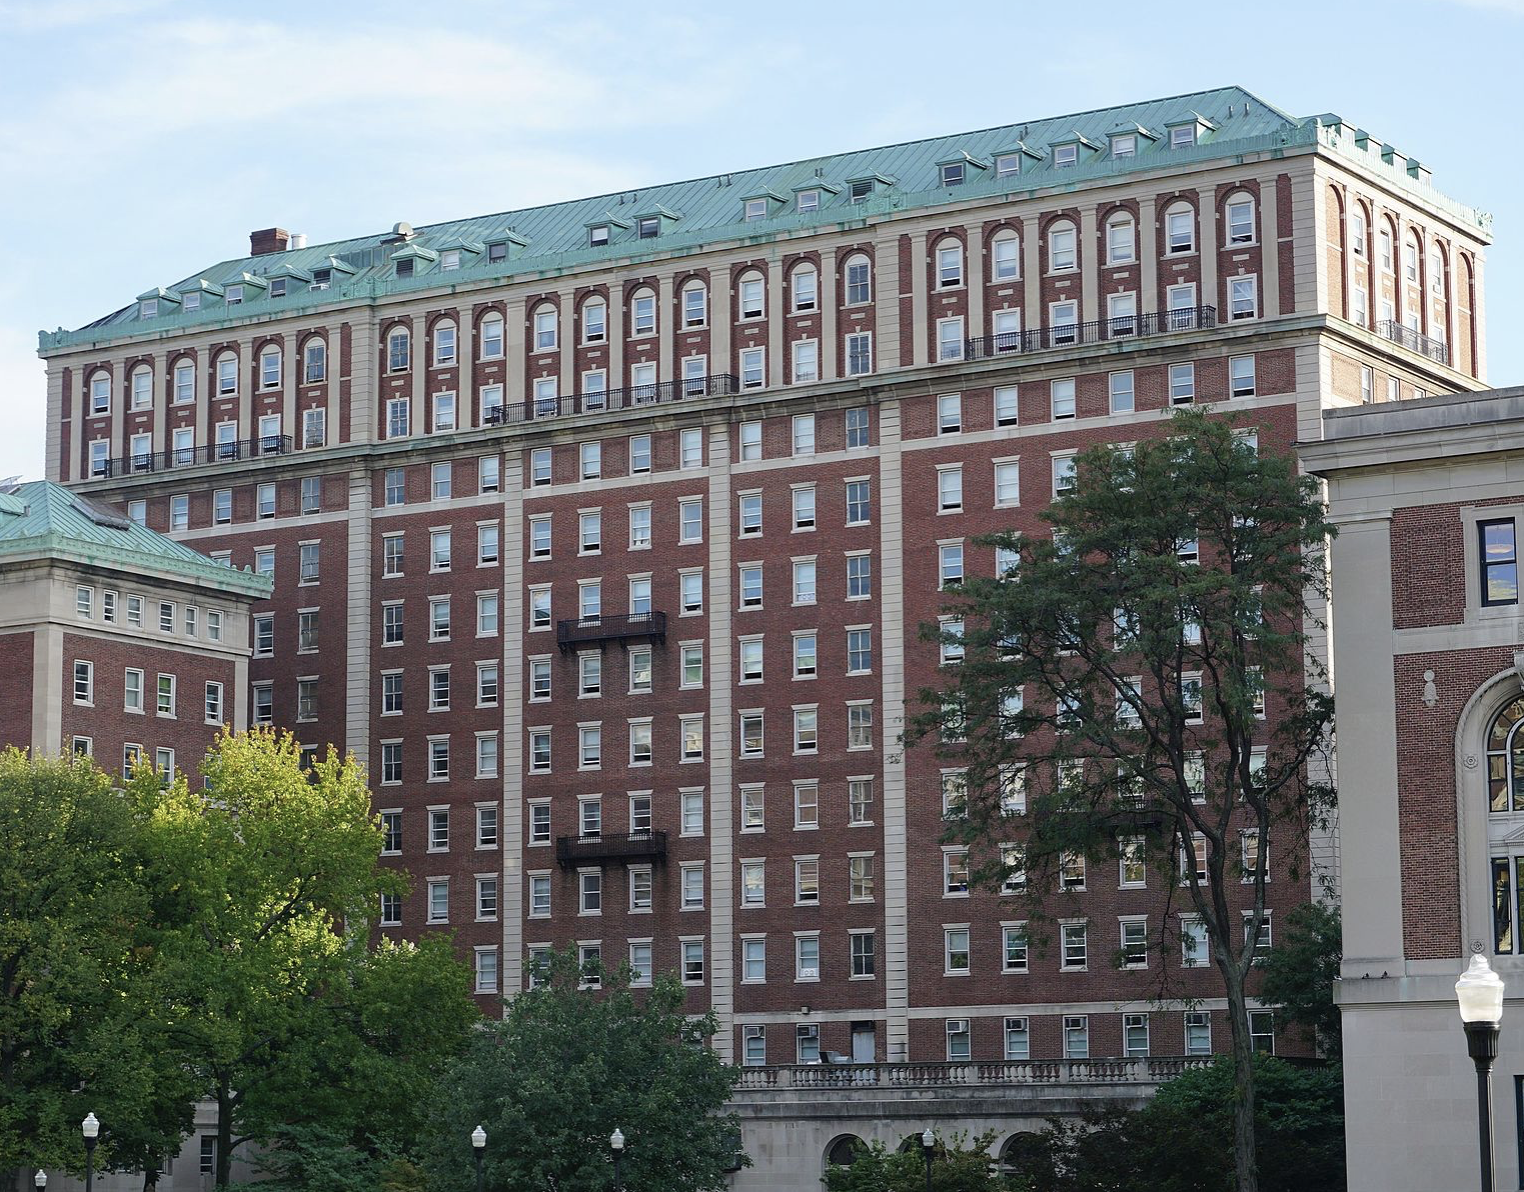 The Fed’s Guide to Columbia Dorms